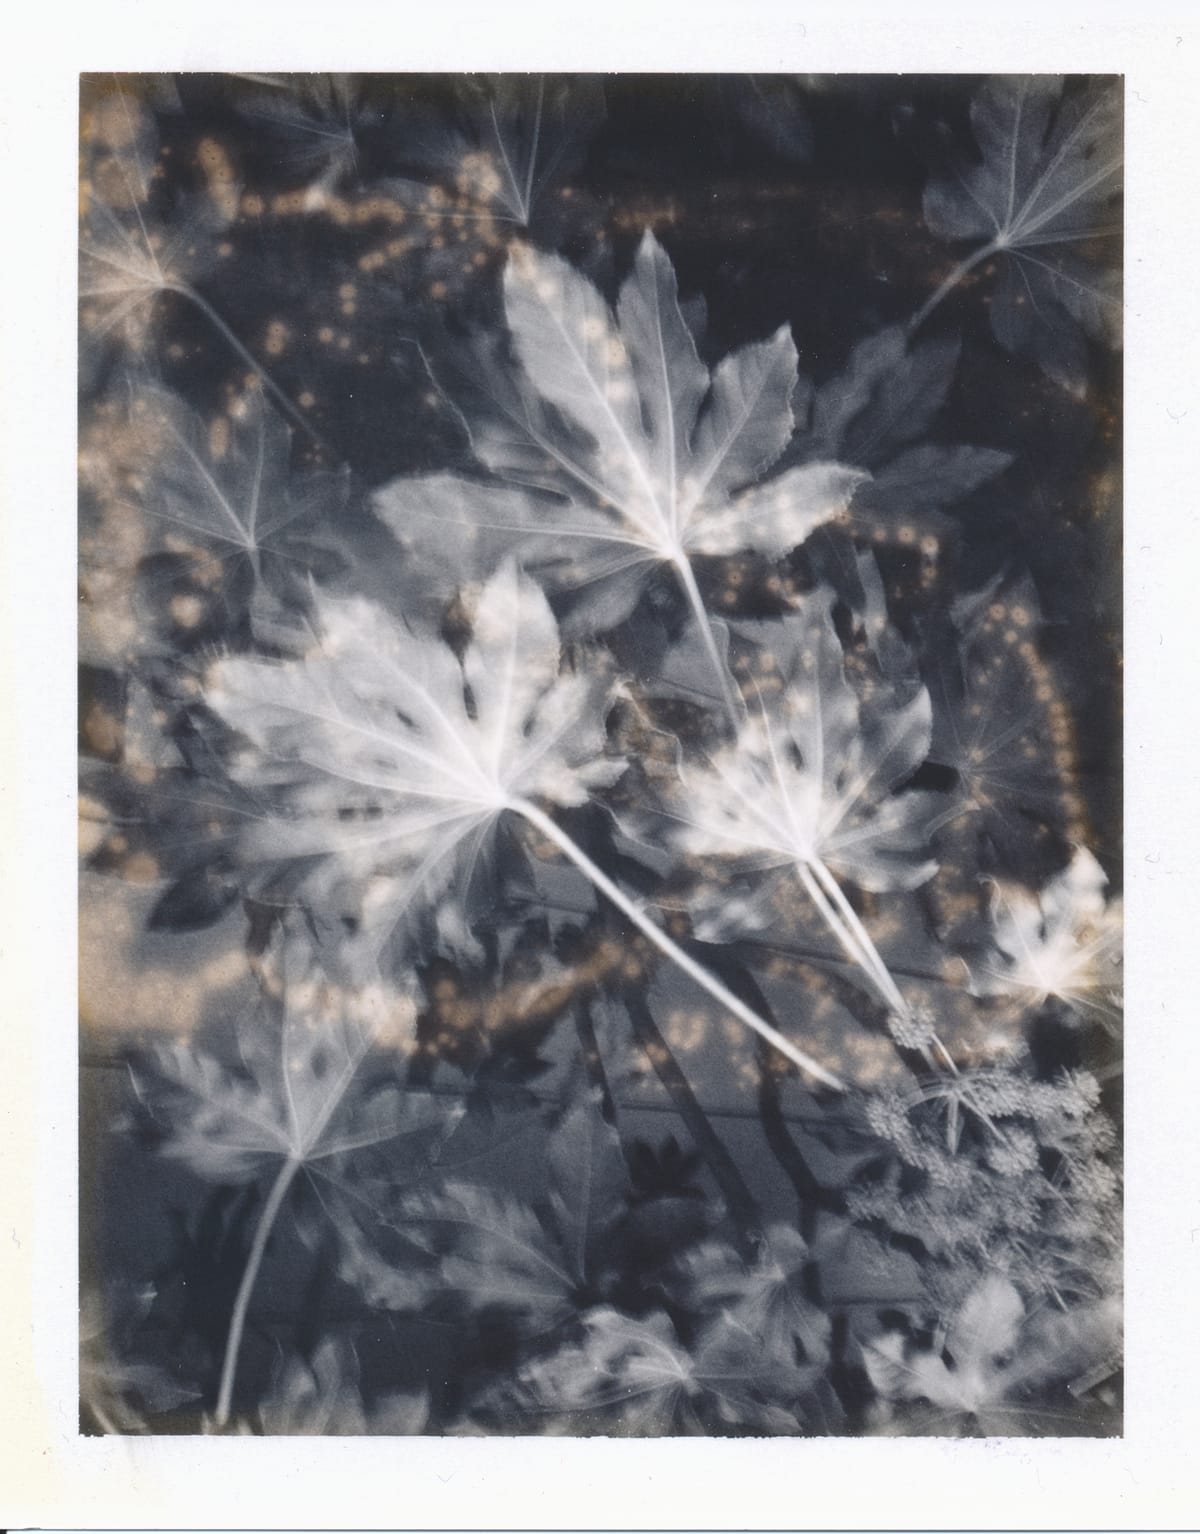 Scan of a Fuji pack film monochrome image of the undersides of large, fan-like leaves, dotted with brown spots